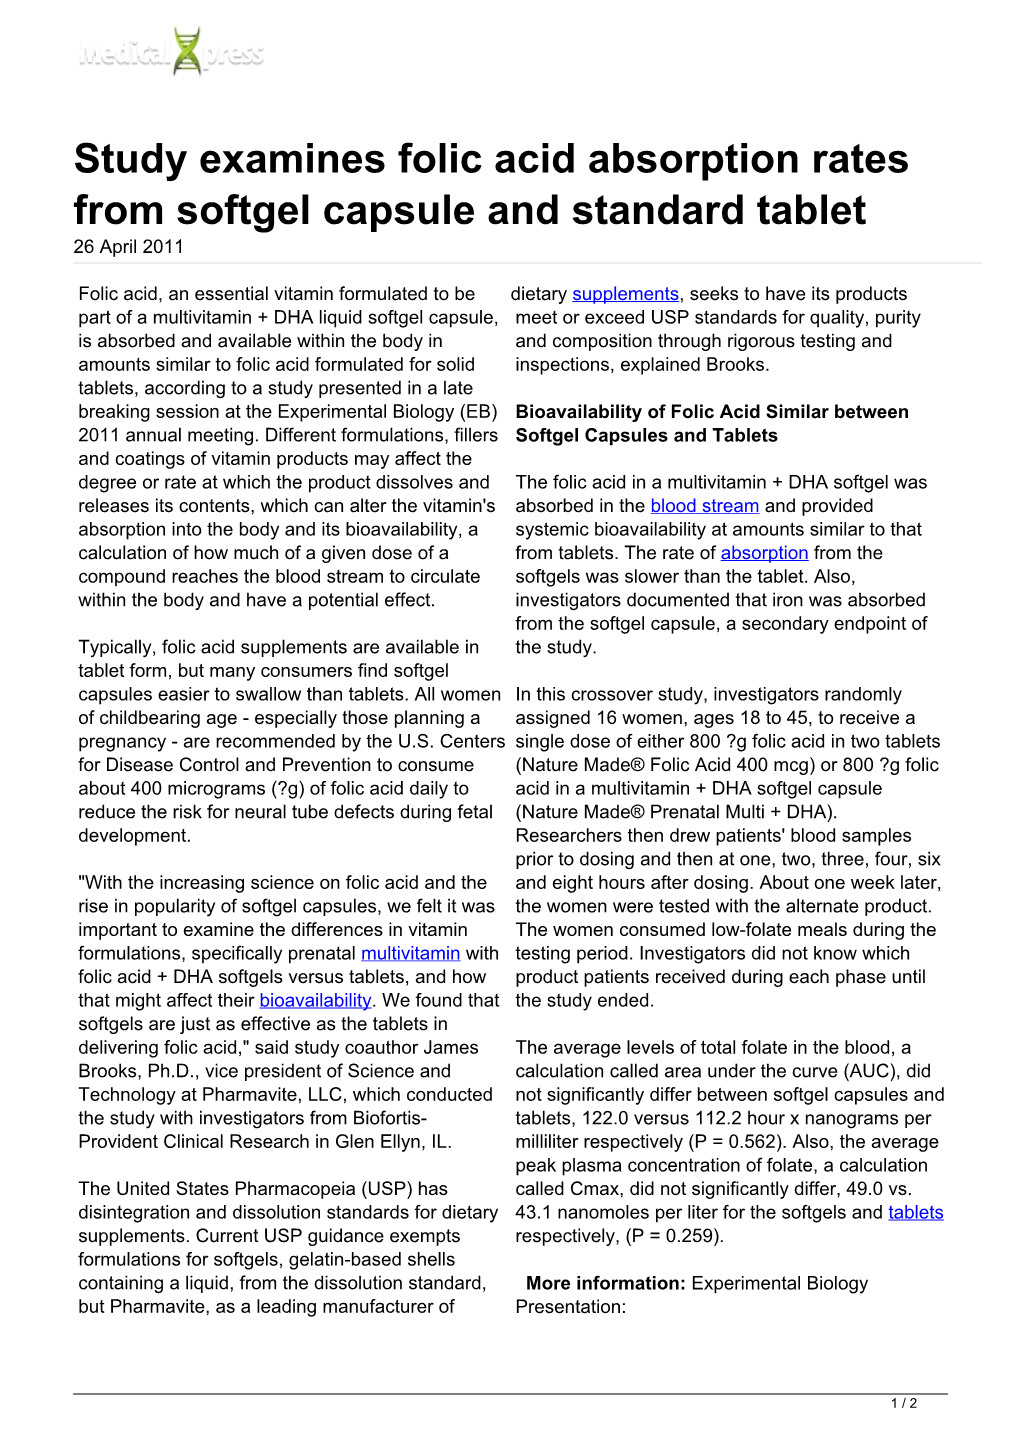 Study Examines Folic Acid Absorption Rates from Softgel Capsule and Standard Tablet 26 April 2011